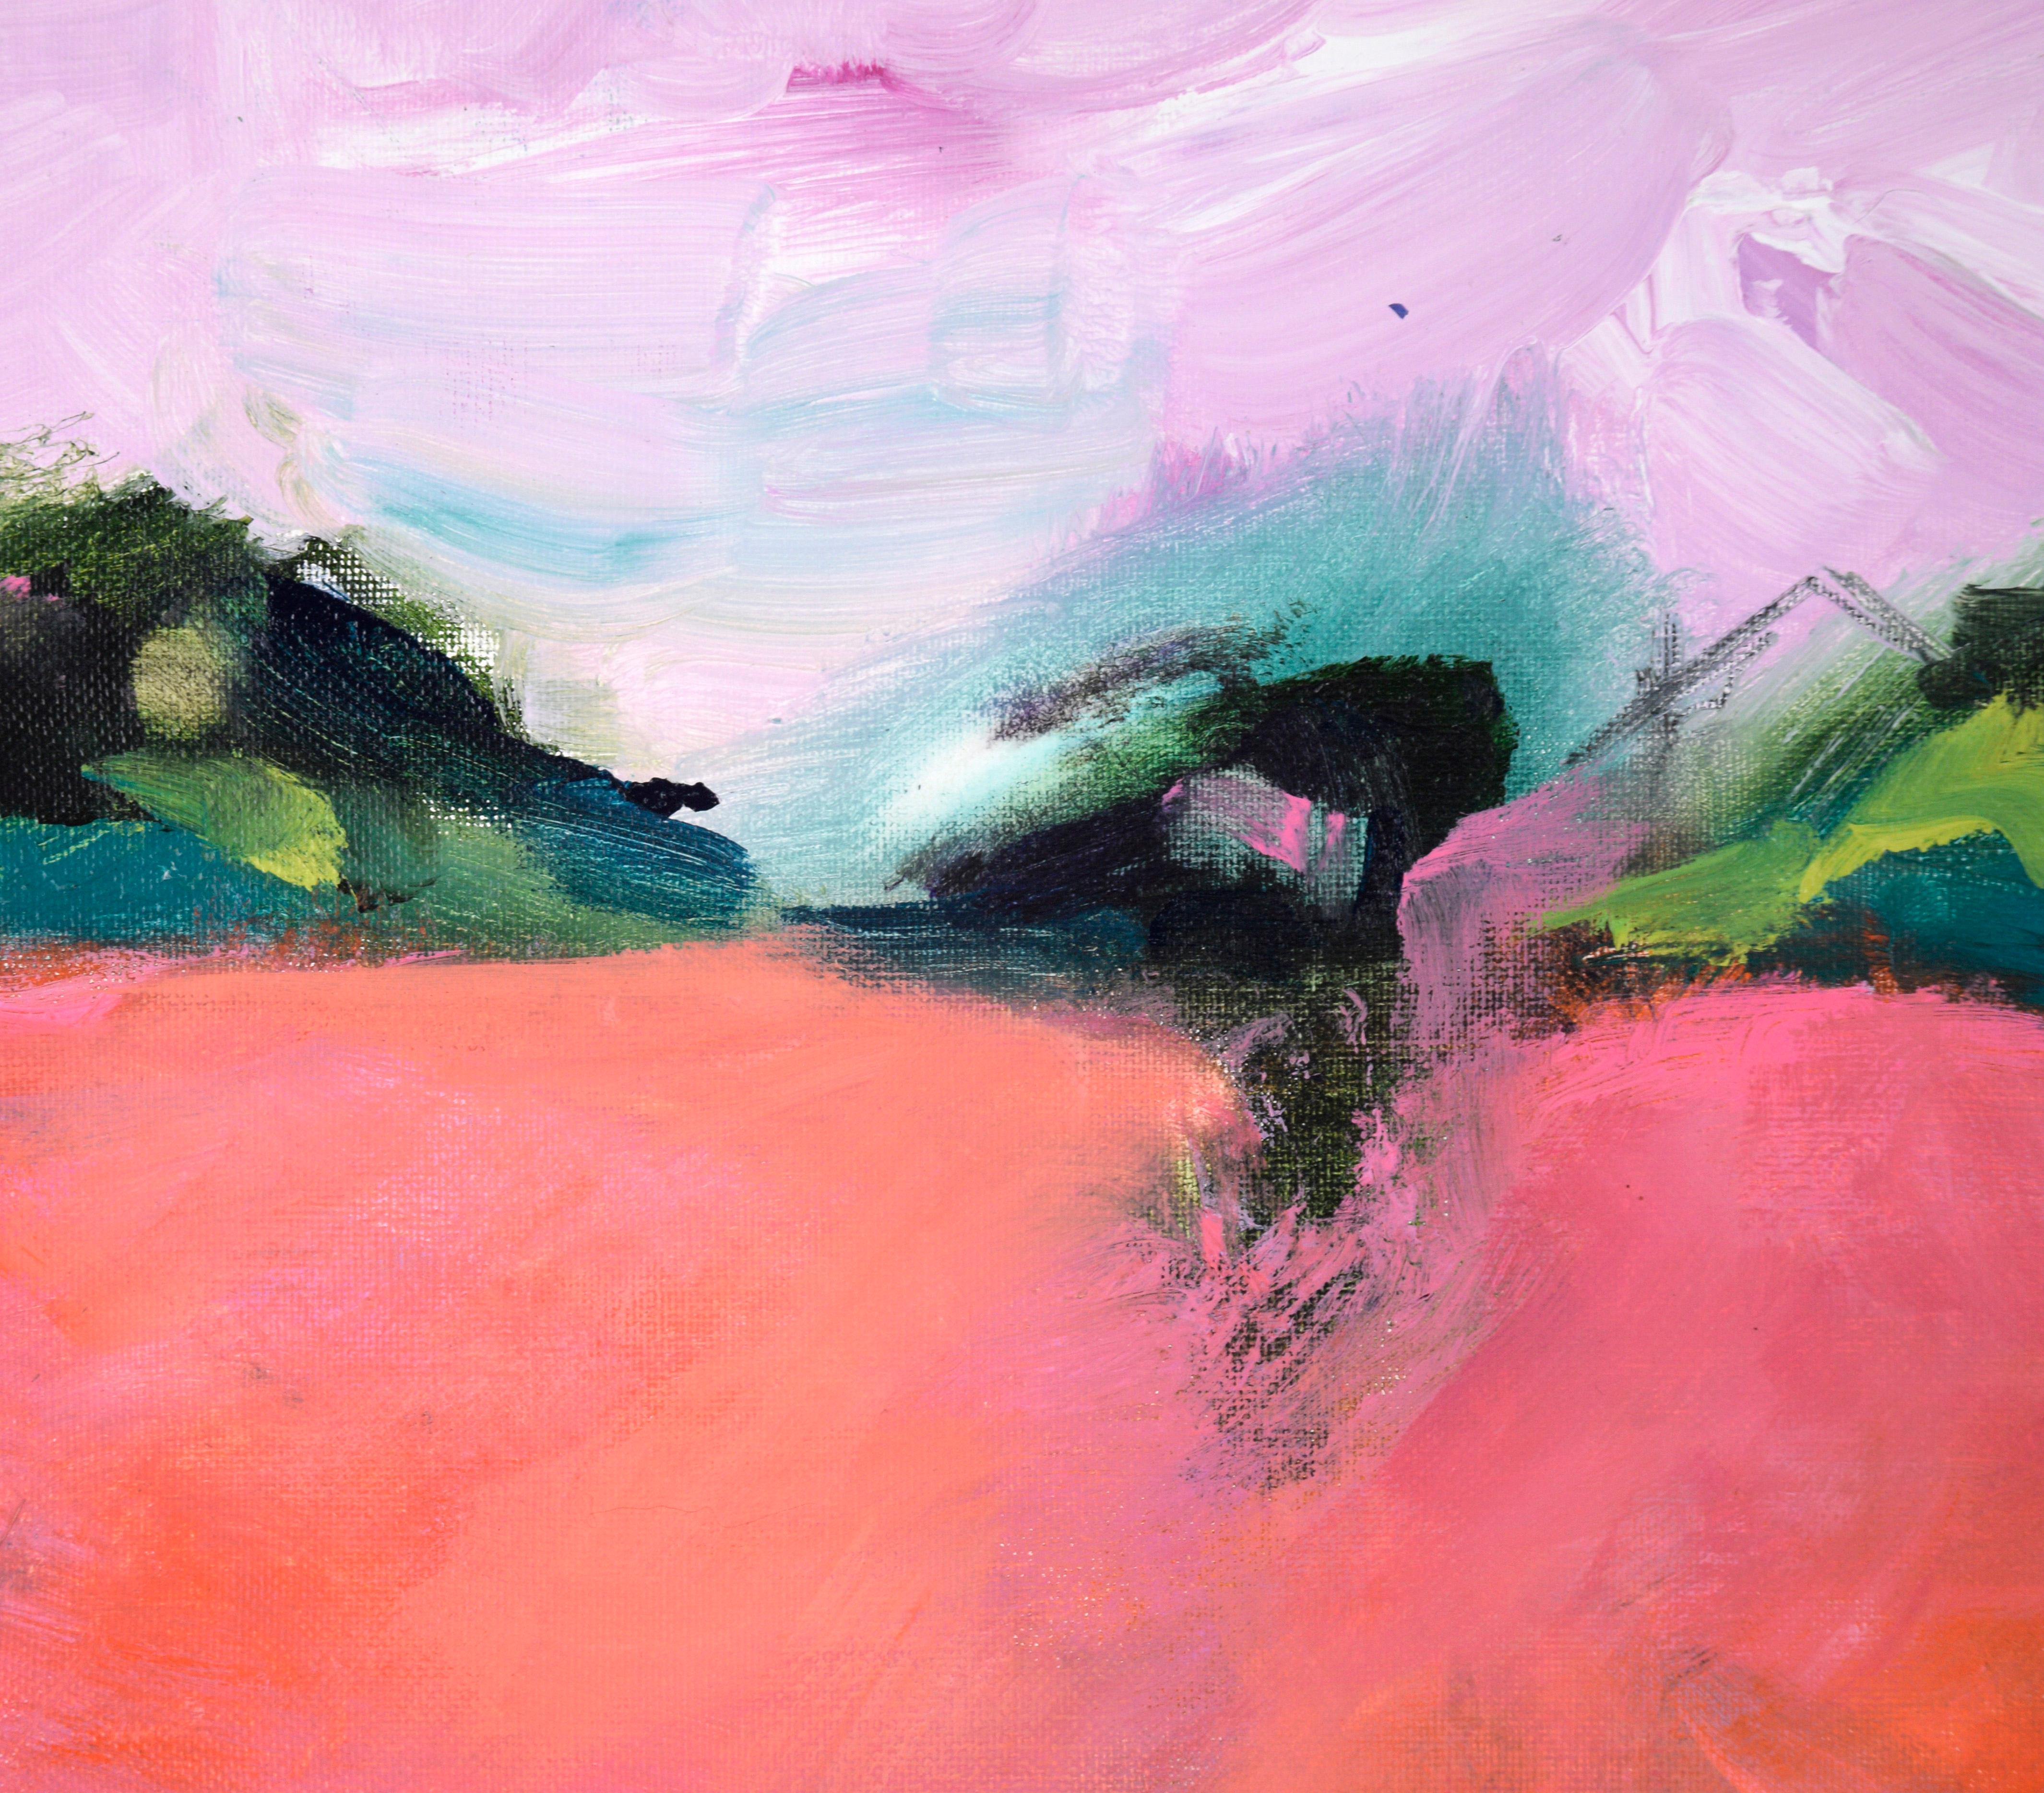 Pink Sky and Magenta Field - Abstracted Landscape in Acrylic on Canvas

Vibrant landscape by Ilana Ingber (American, b. 1984). A bright magenta field unfolds towards the horizon, where dark trees contrast against the sky. The sky is pink and white,